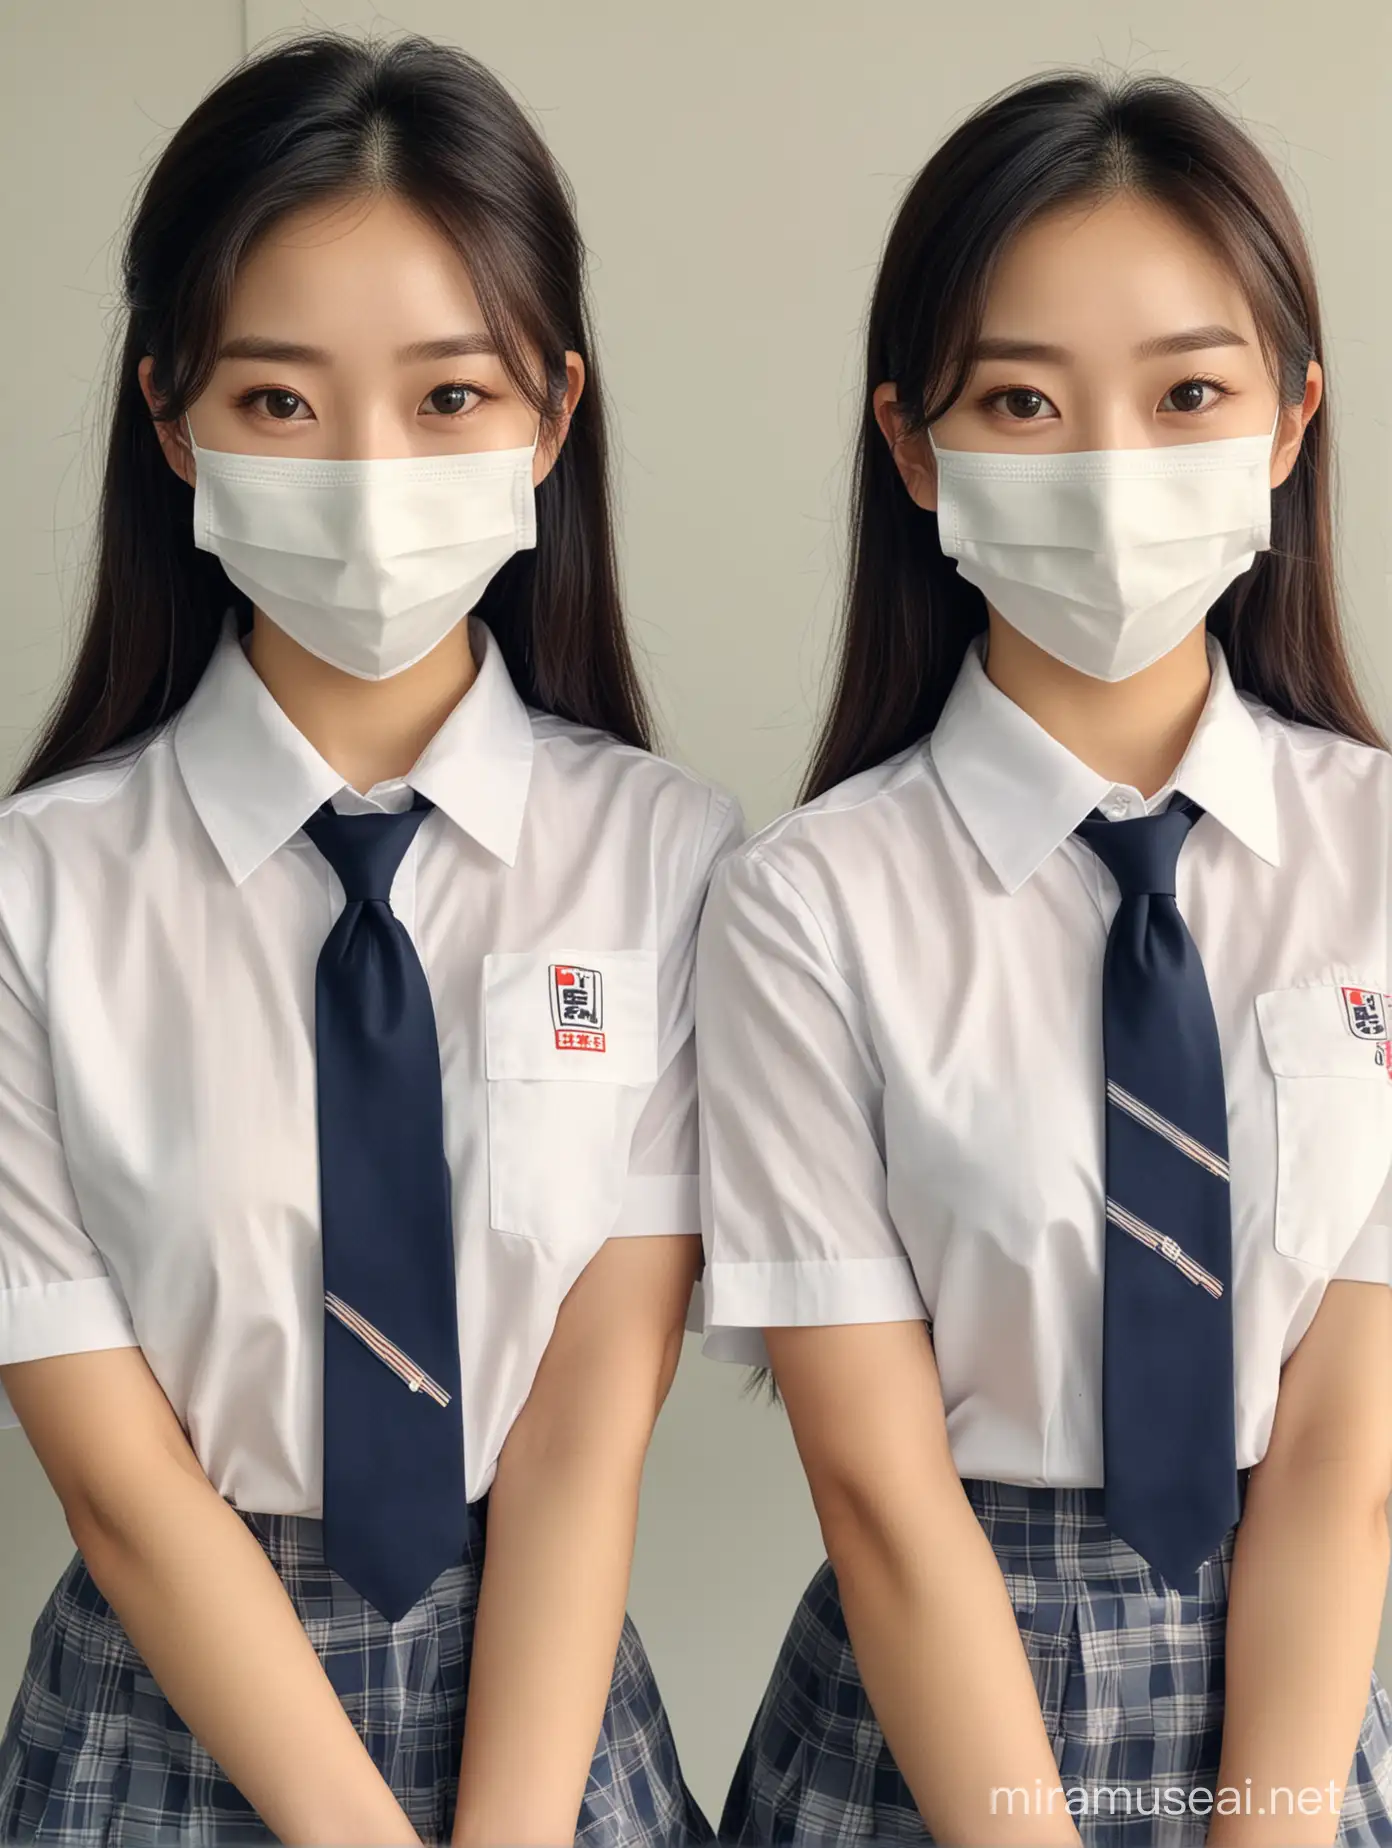 pretty korean school girls in masks, two of them, sisters, around the same height, same uniform, full uniform with tie, short sleeves, smiling at camera, very pretty eyes like actress